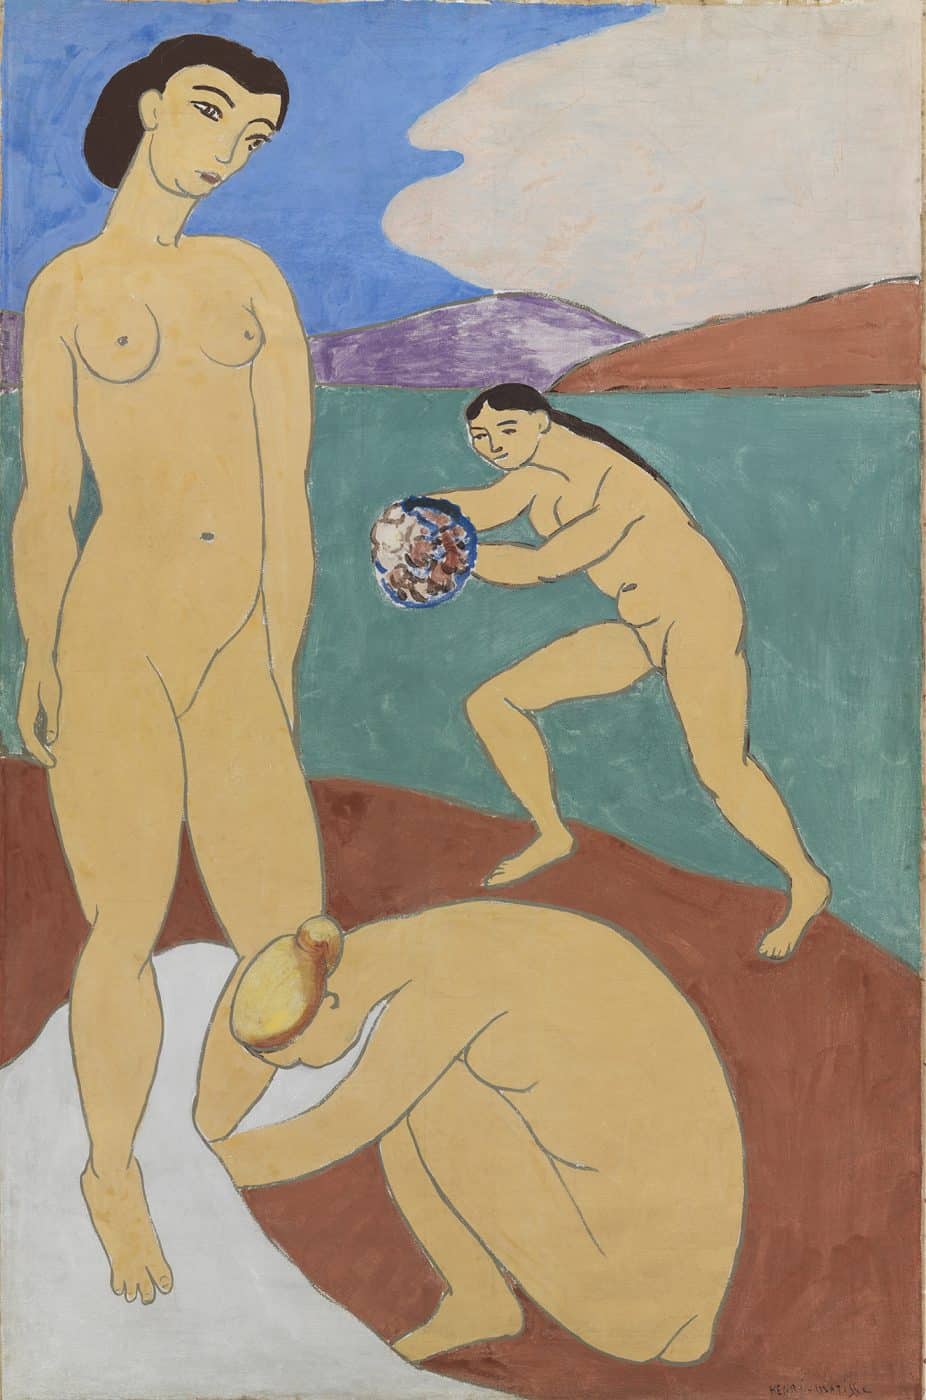 Le Luxe II, 1907-8, by Henri Matisse